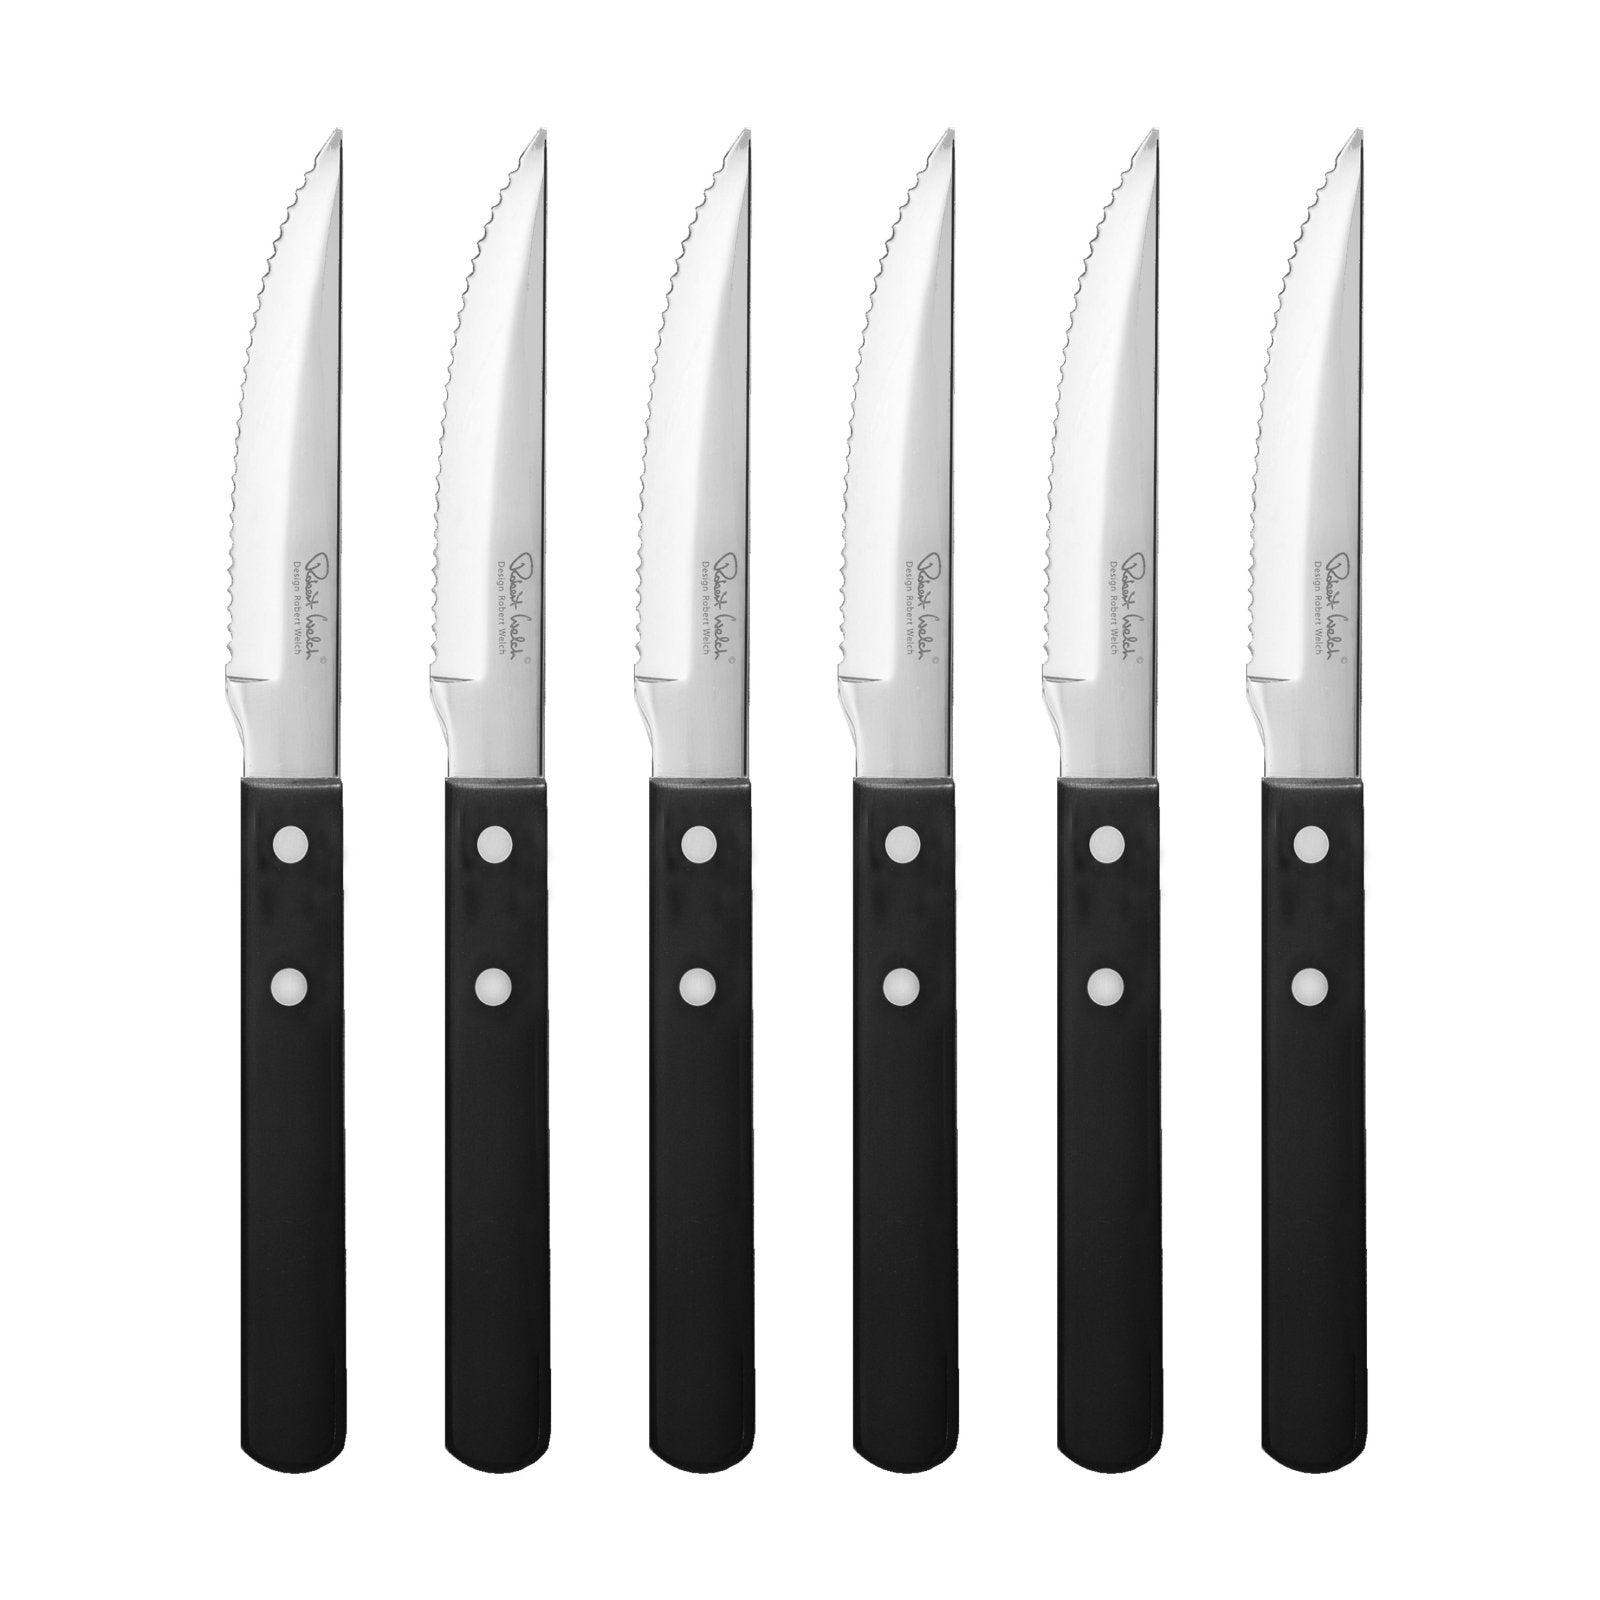 Robert Welch Trattoria Steak Knife 6 Piece - TRABR1012V/6 - The Cotswold Knife Company